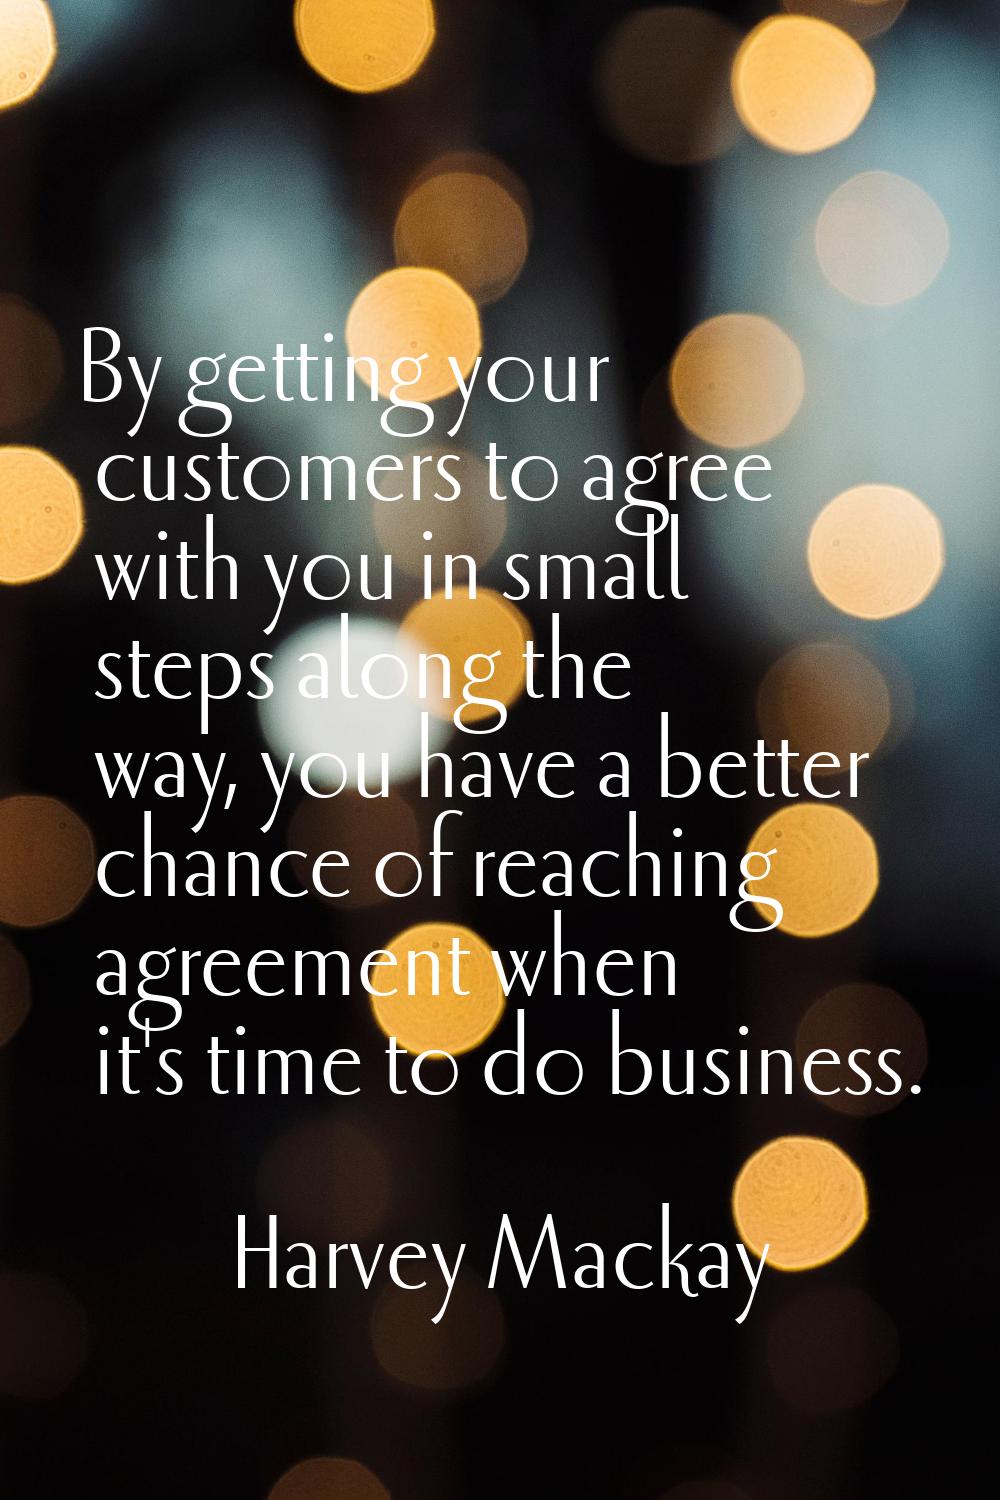 By getting your customers to agree with you in small steps along the way, you have a better chance 